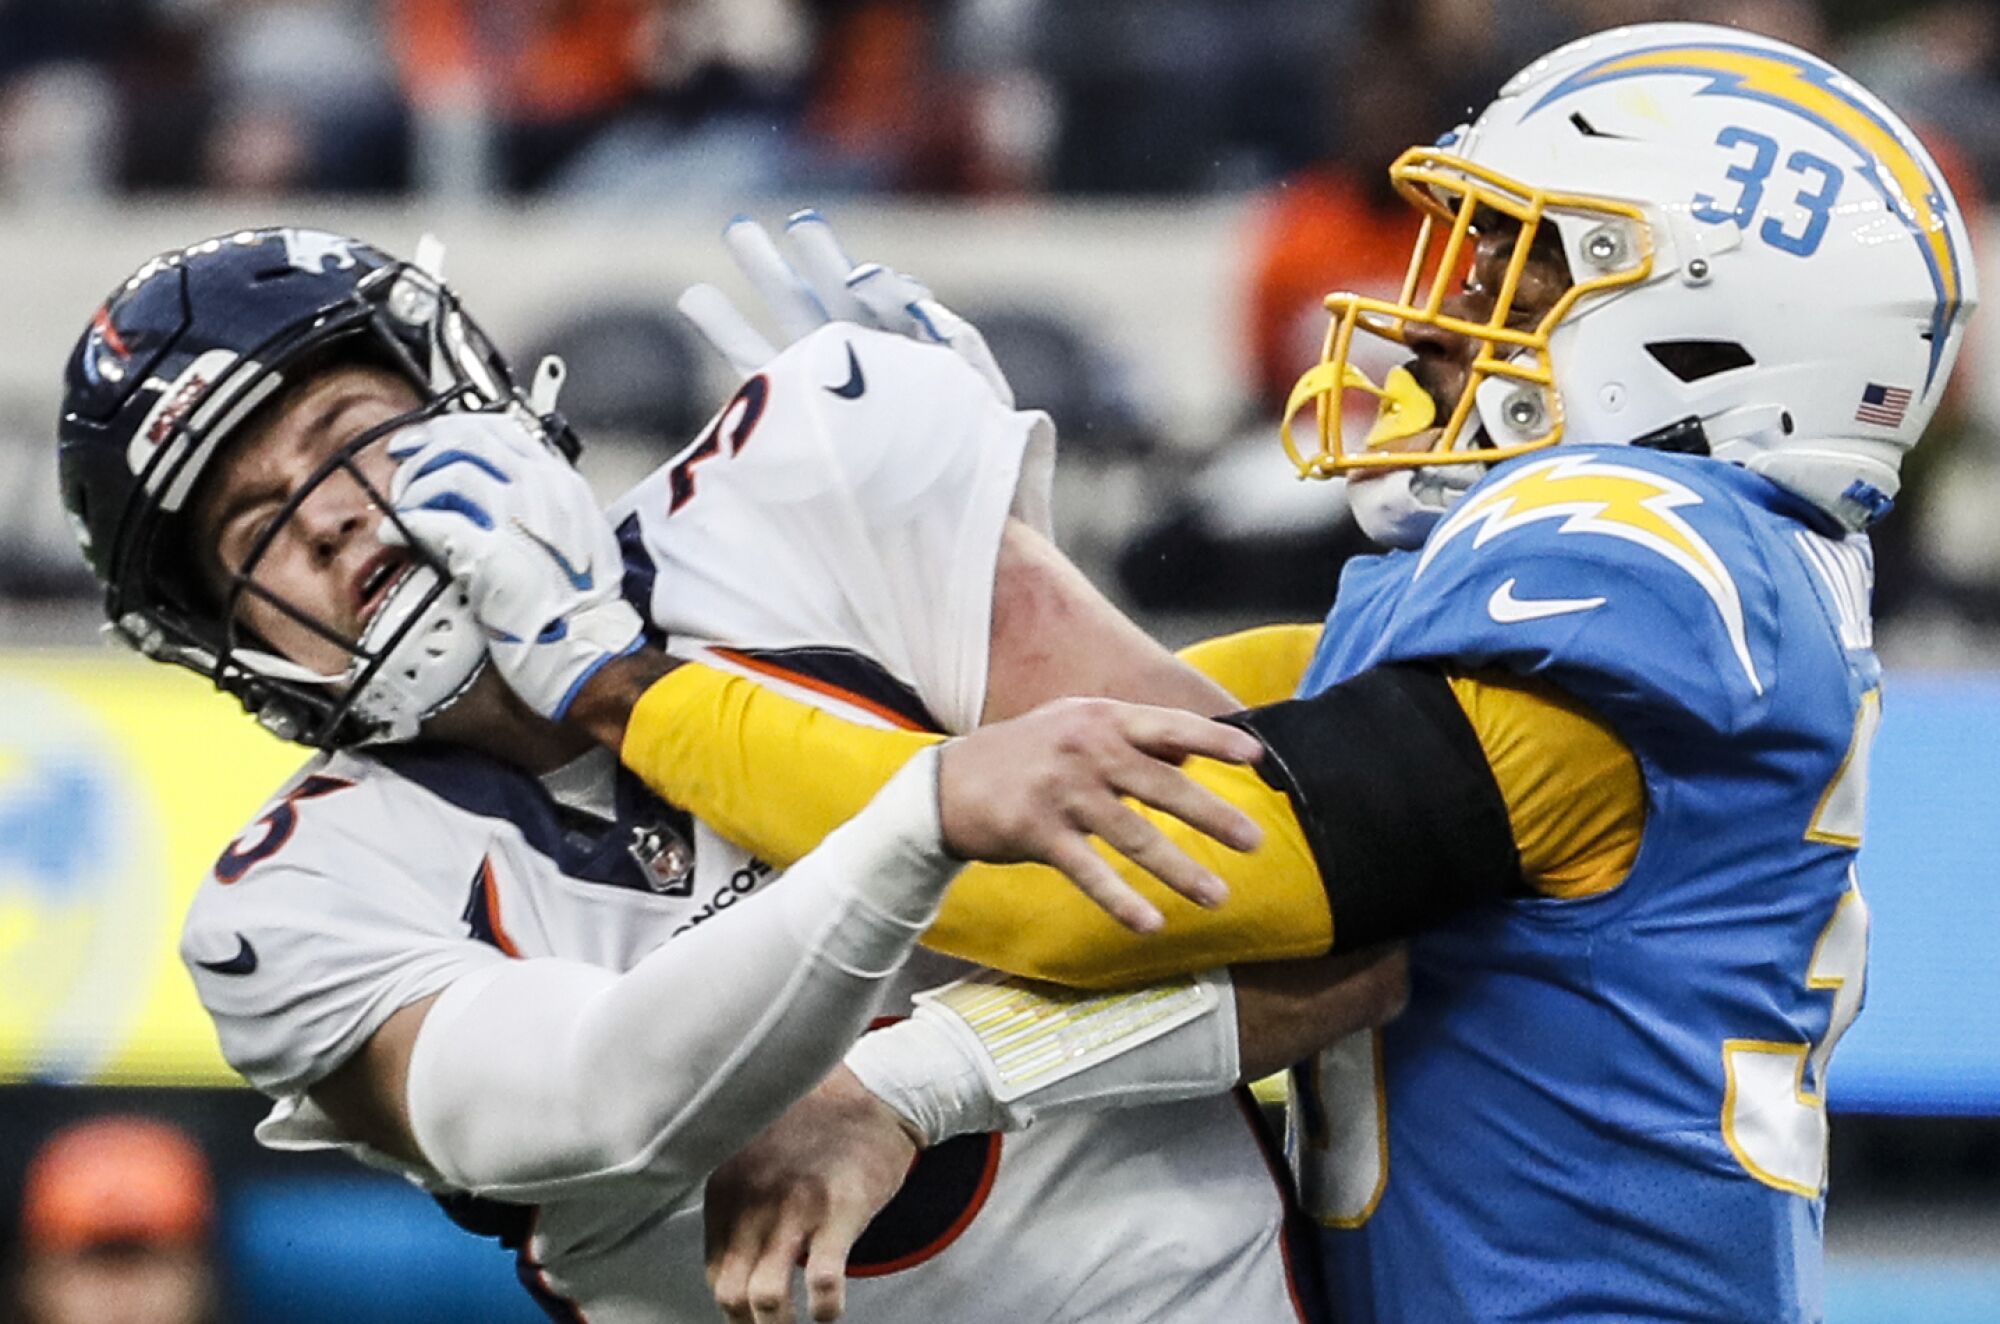 Chargers free safety Derwin James is penalized for roughing the passer as he hits Denver Broncos quarterback Drew Lock.